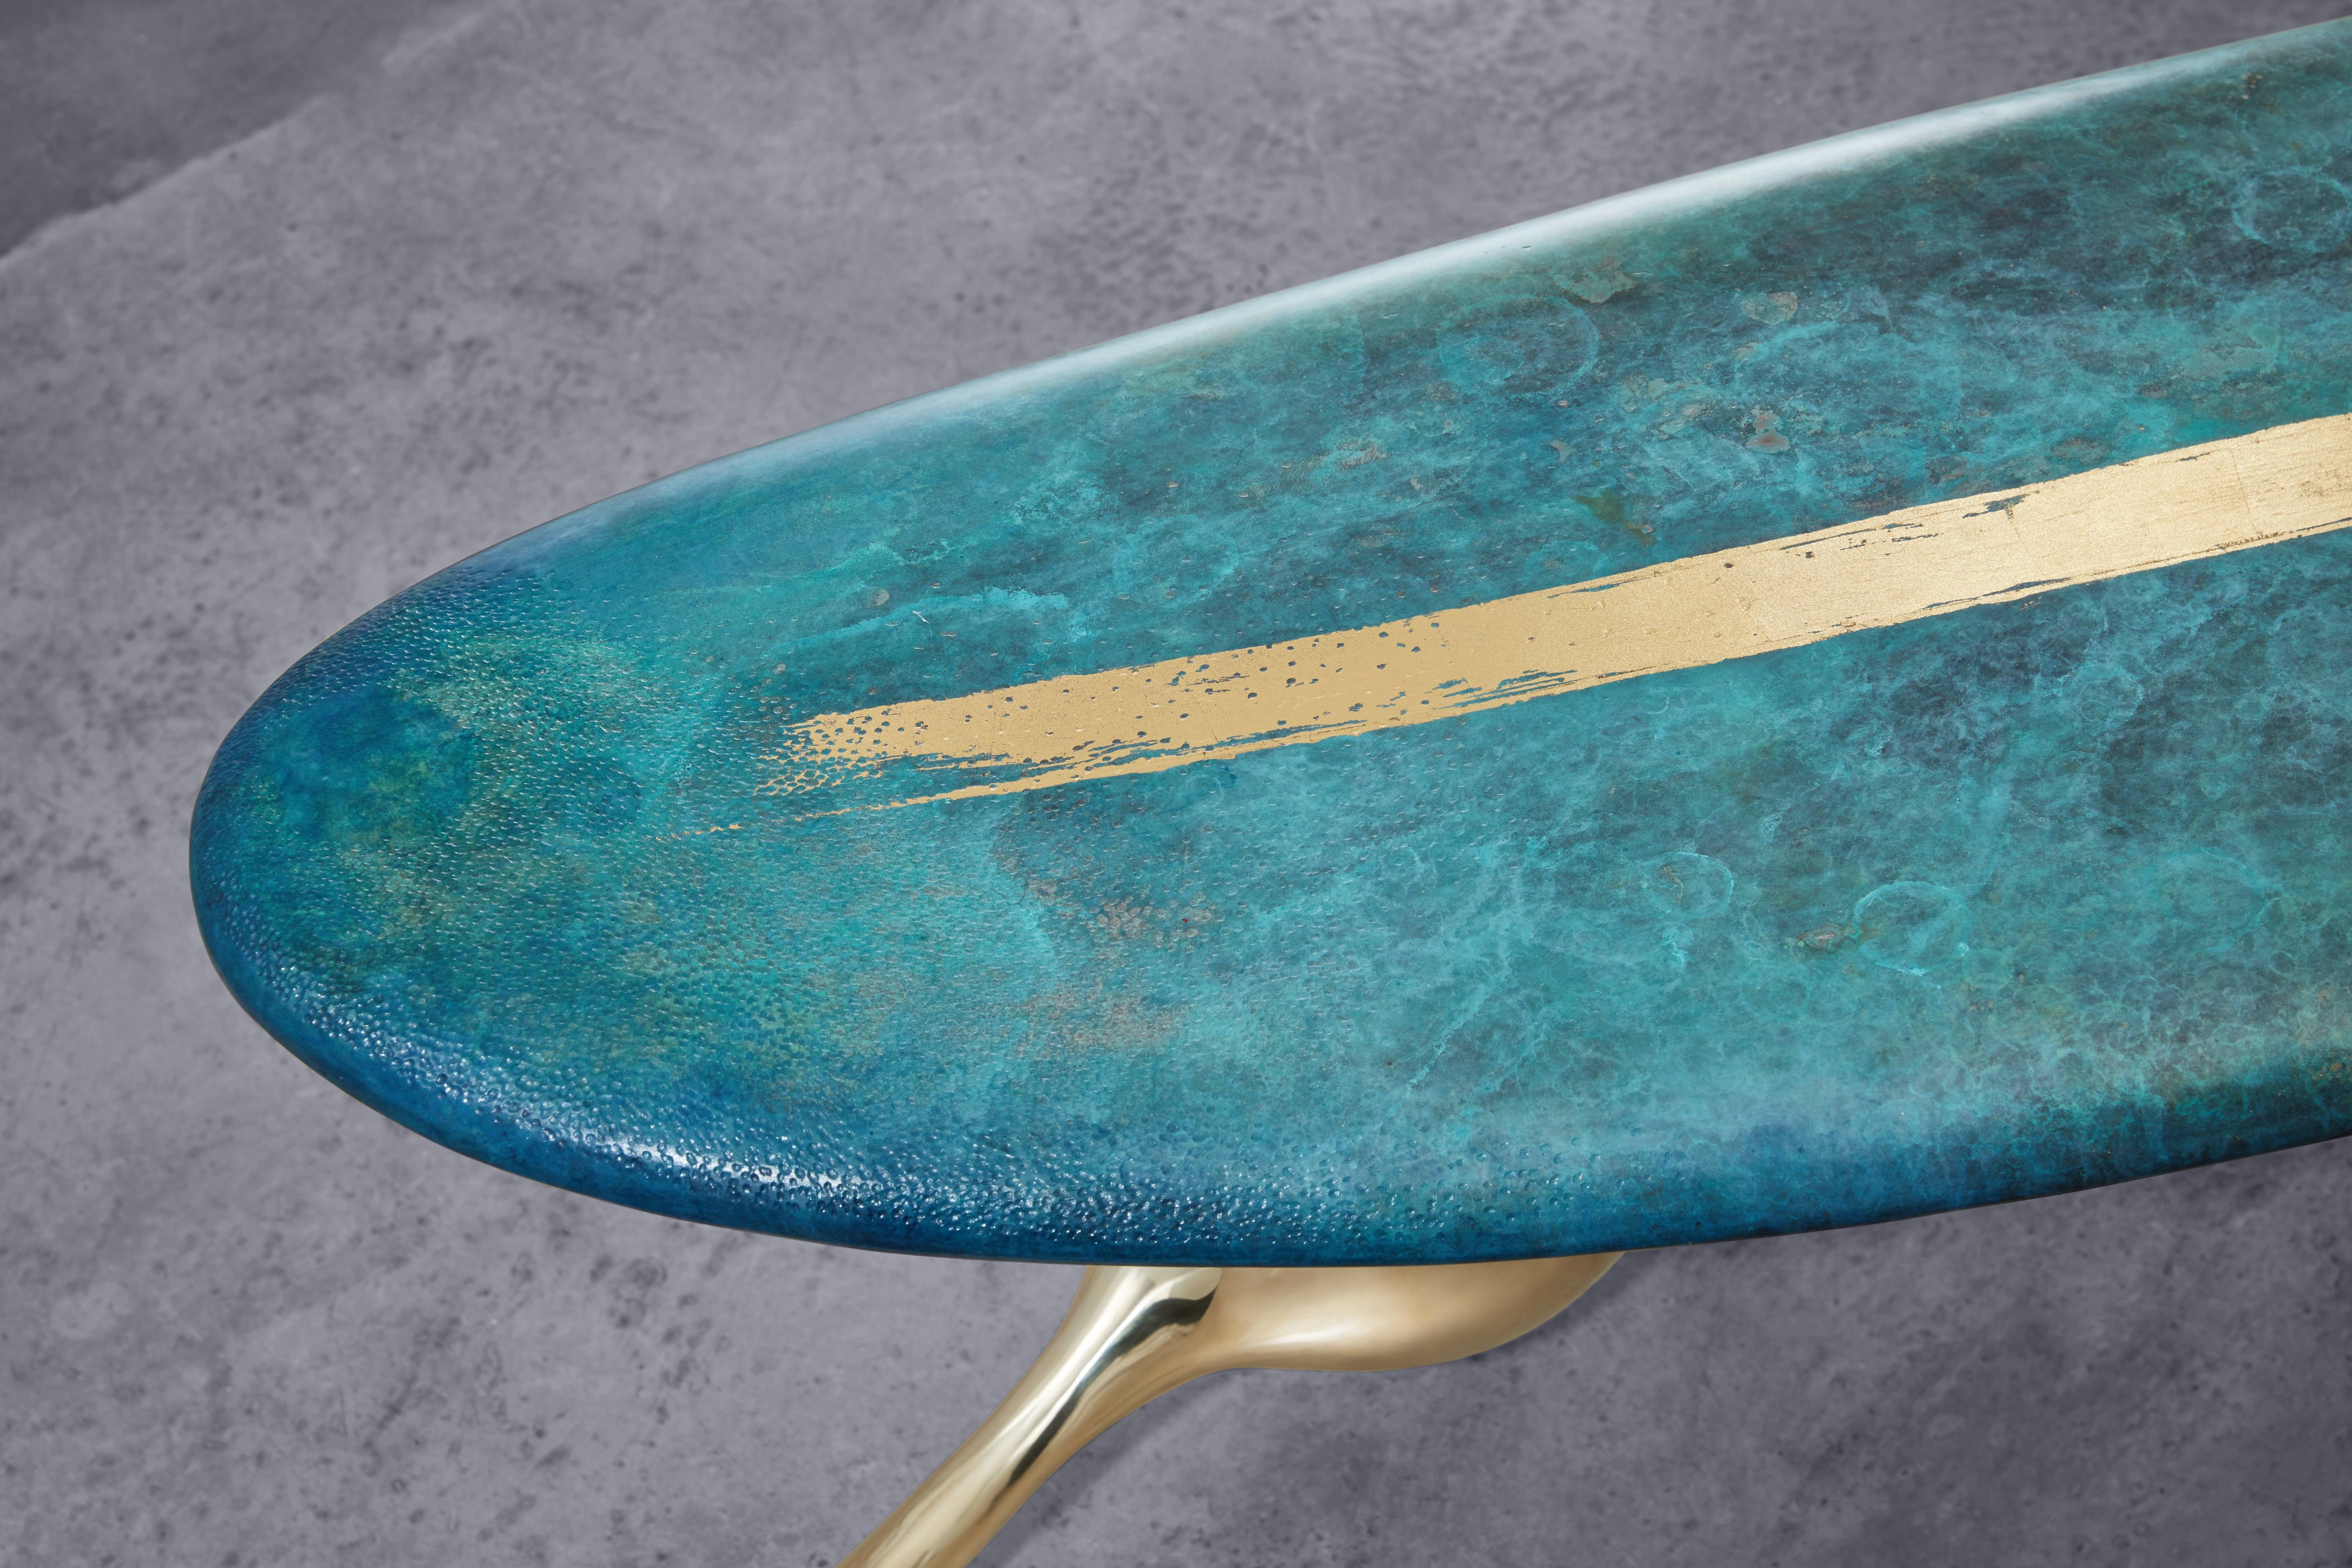 Contemporary Zhipeng Tan, Brass 'Surf' Bench, TanTan Collection For Sale